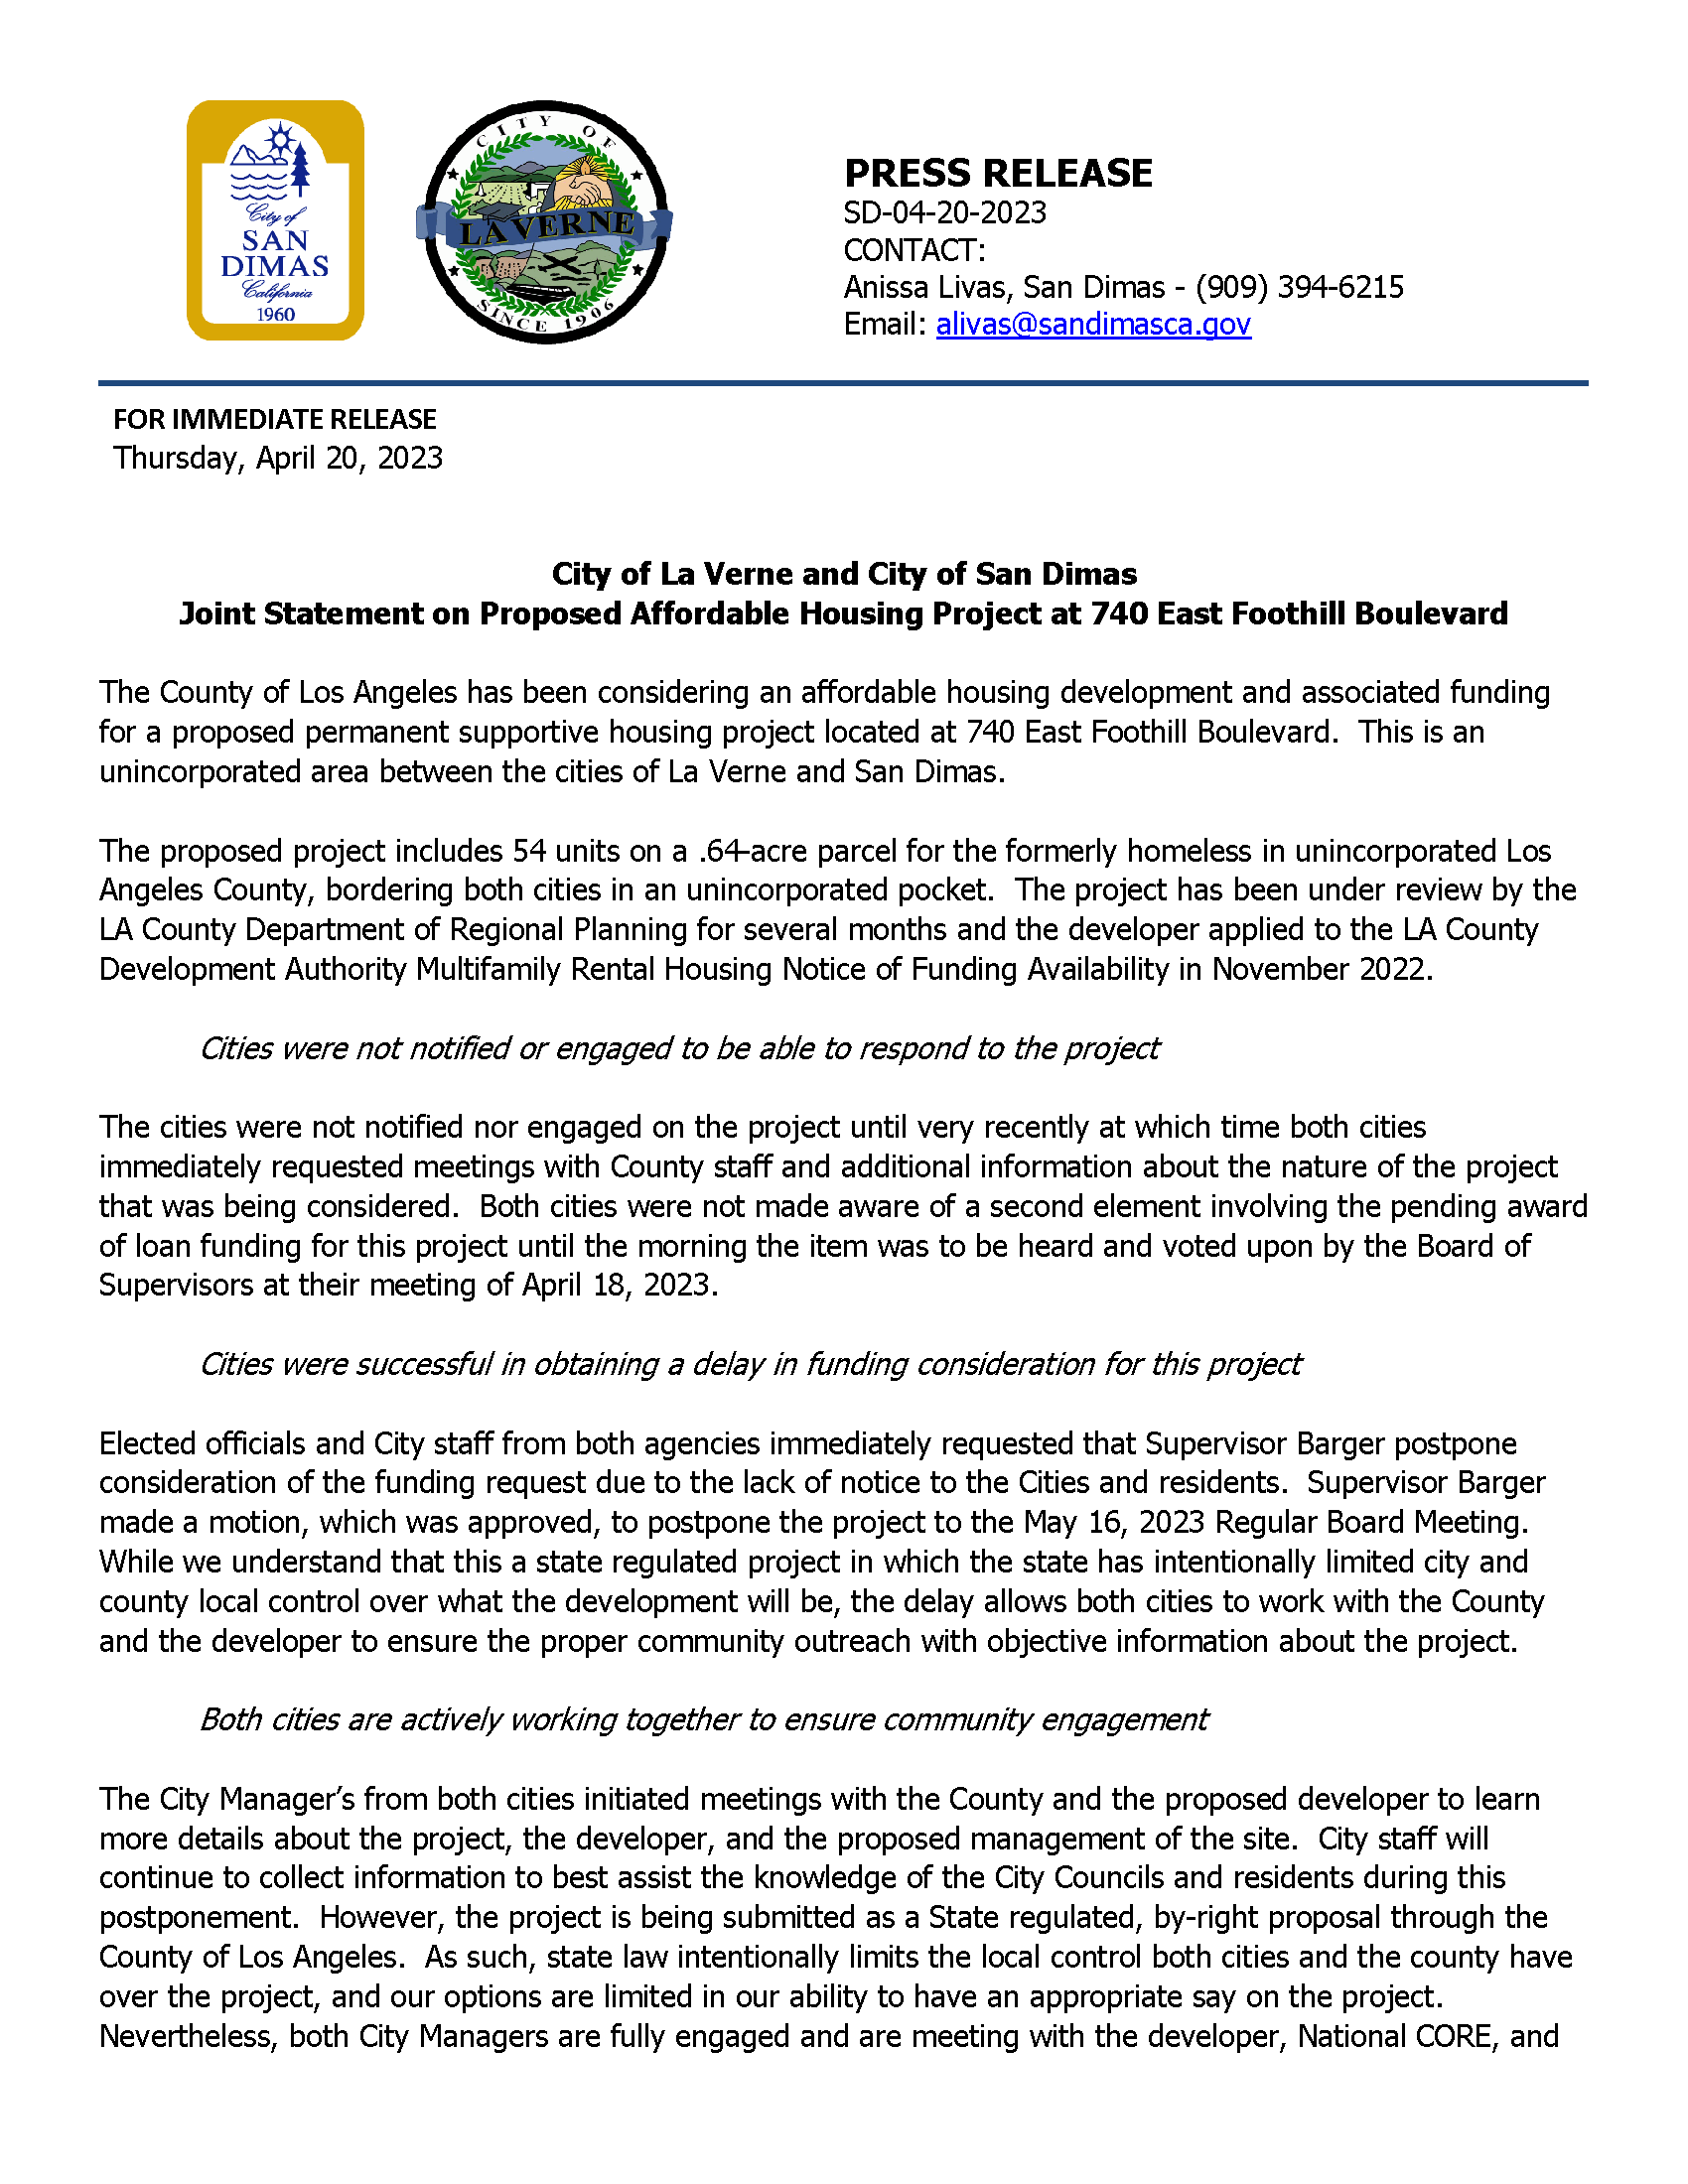 Press Release - SD and LV Joint Statement on 740 E Foothill Blvd_Page_1